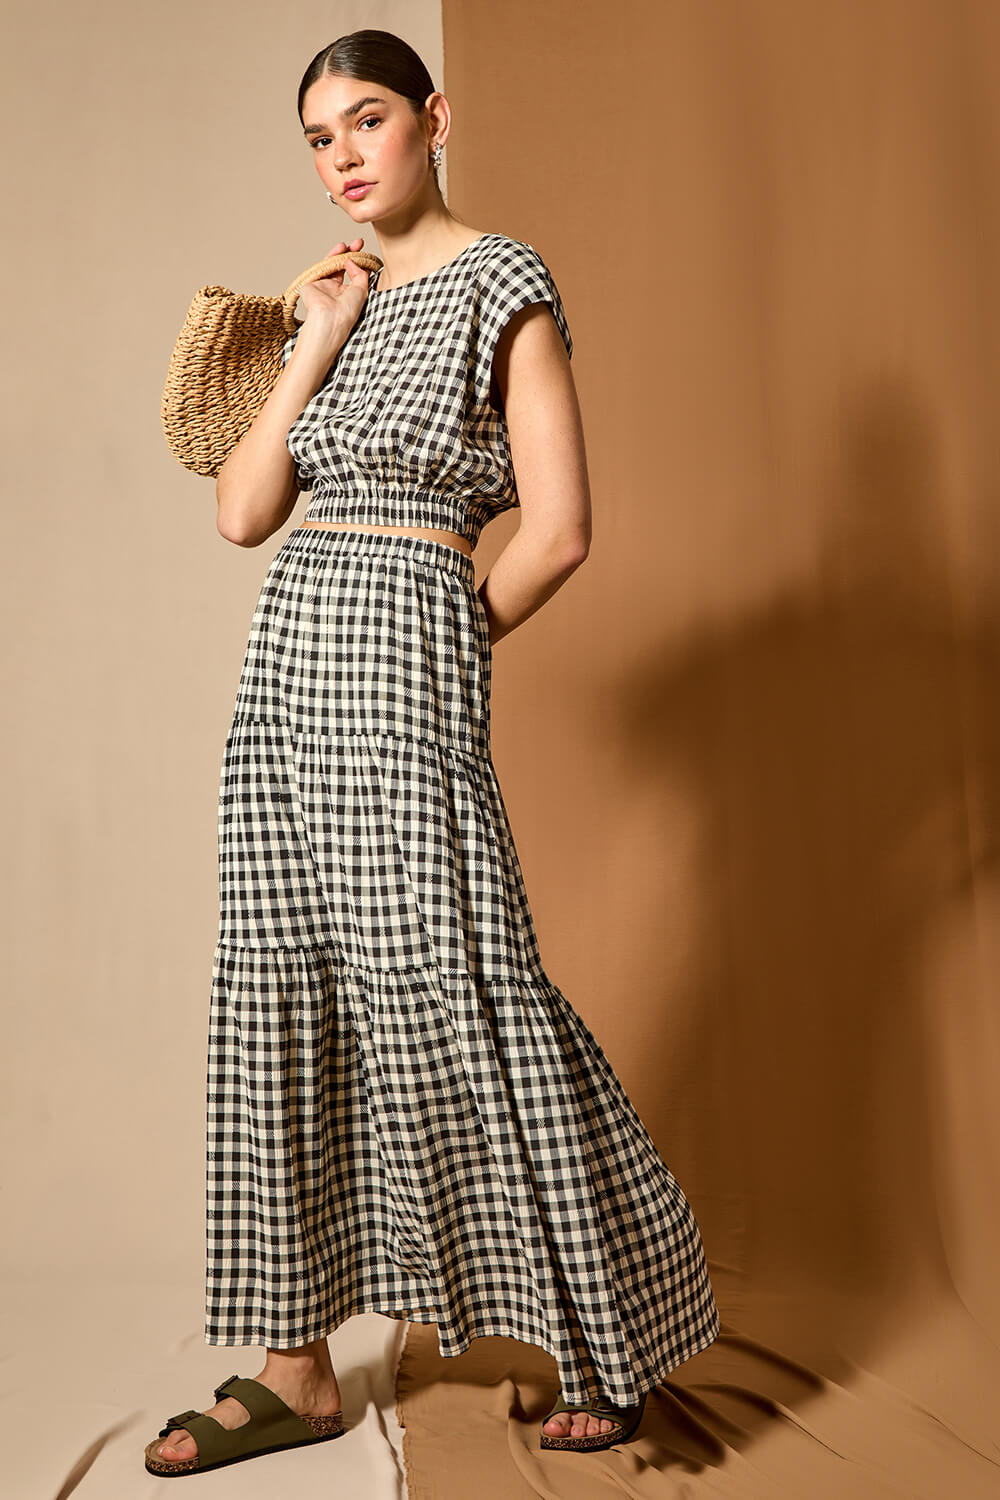 Black Gingham Check Tiered Maxi Skirt, Image 6 of 7